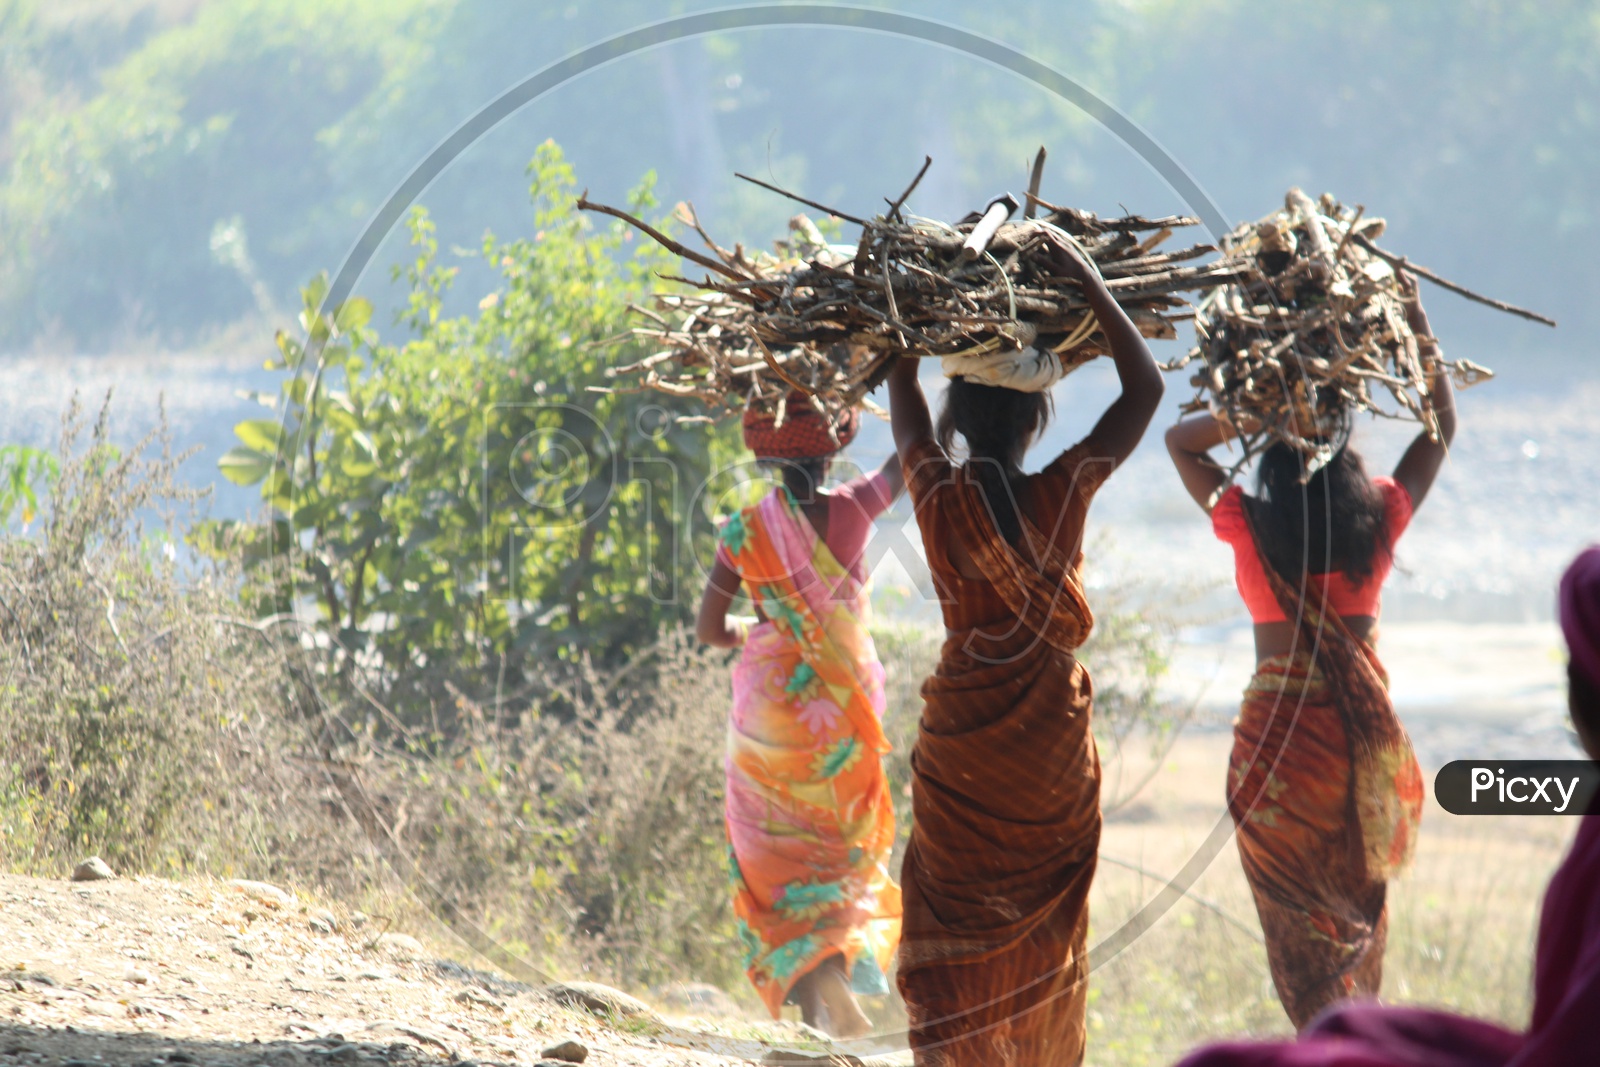 women carrying wood for cooking